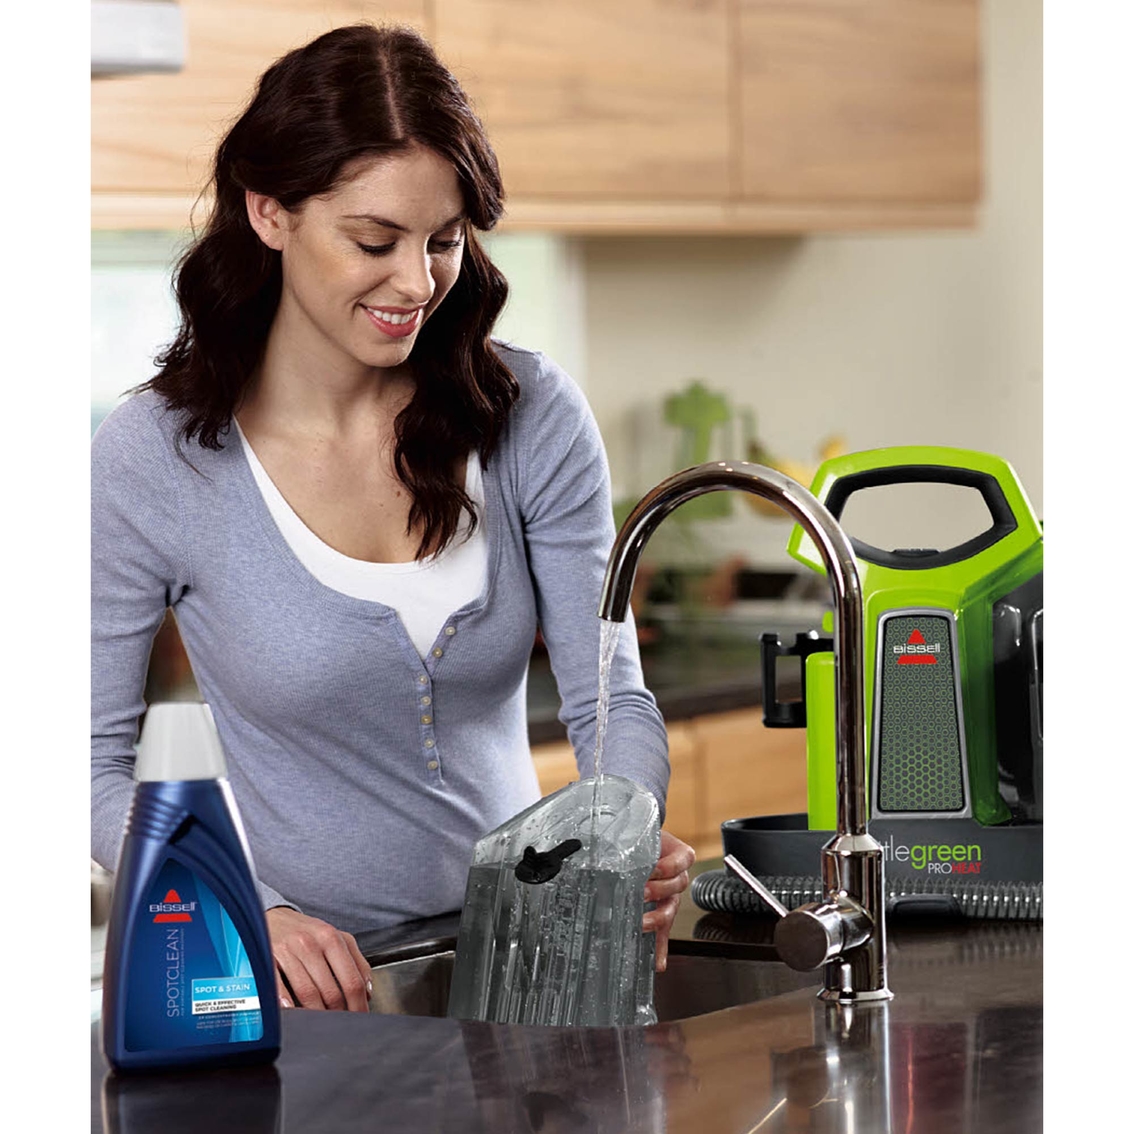 BISSELL Little Green ProHeat Portable Deep Cleaner - 2513G